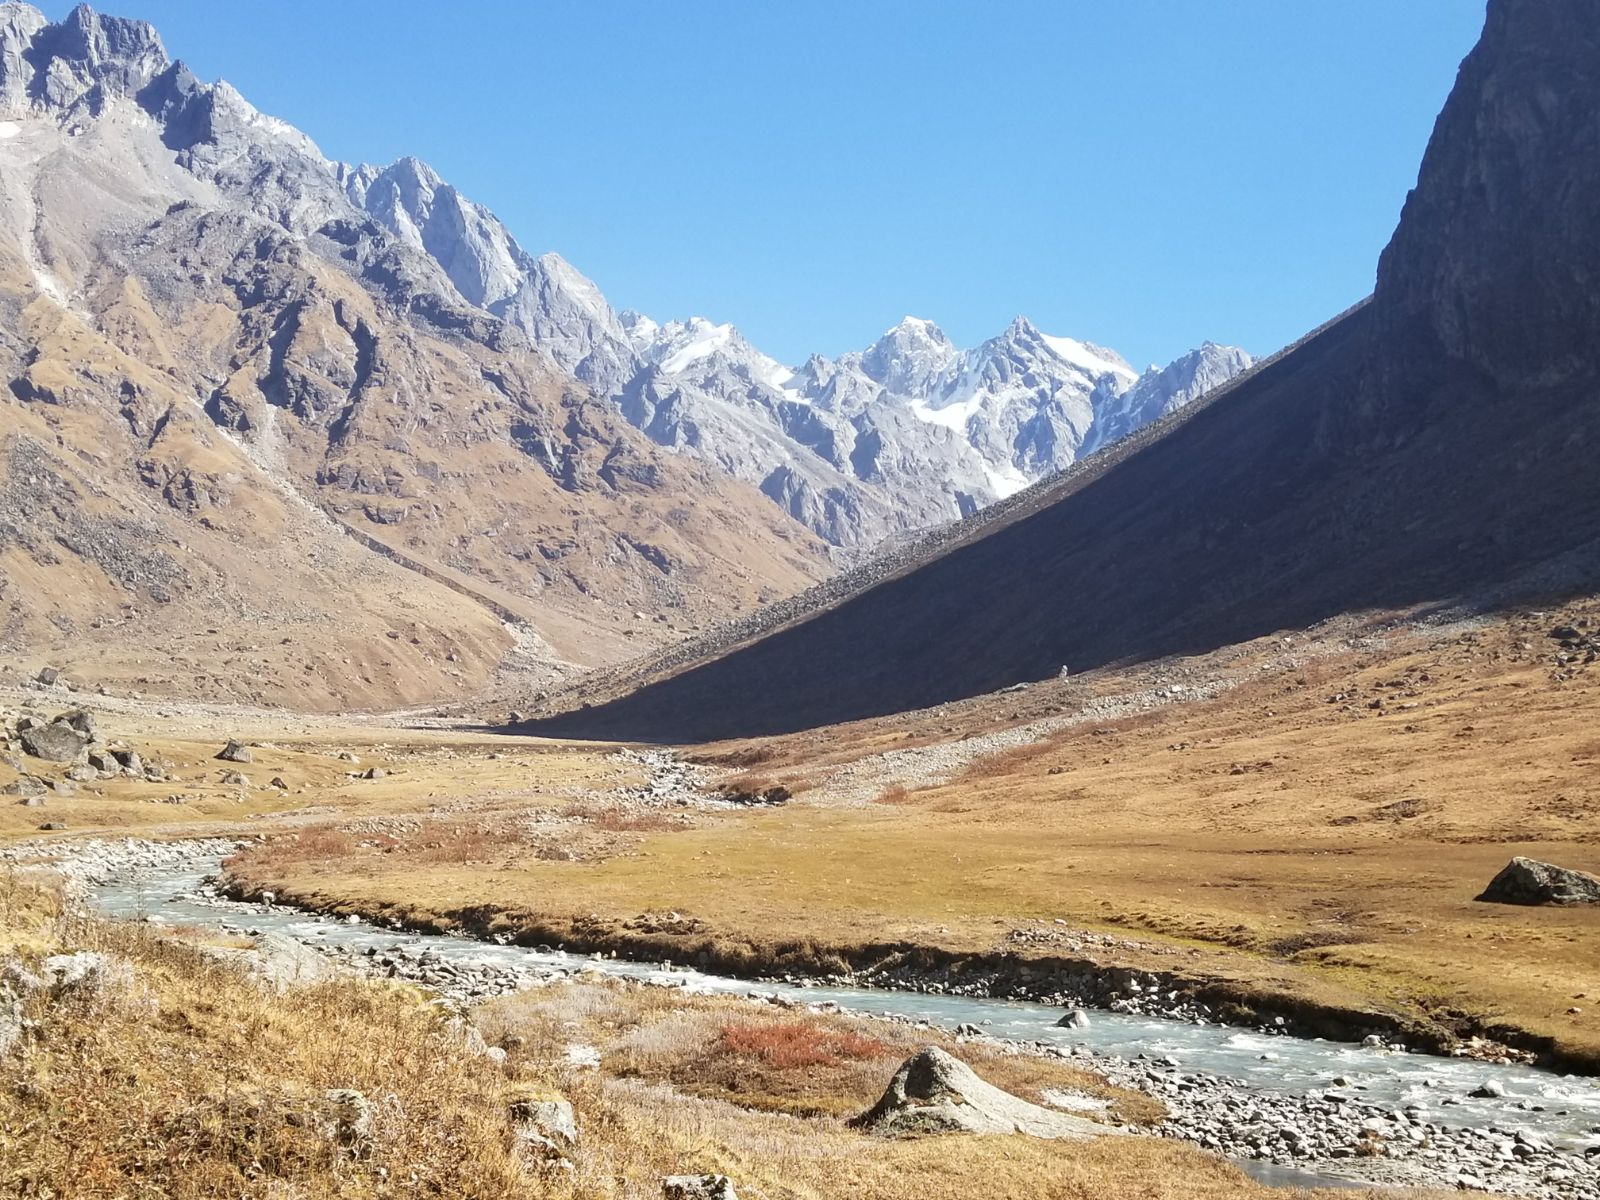 A Glaciel Stream cuts through the Hata Valley that lies just above Har Ki Doon - Himalayan Institute